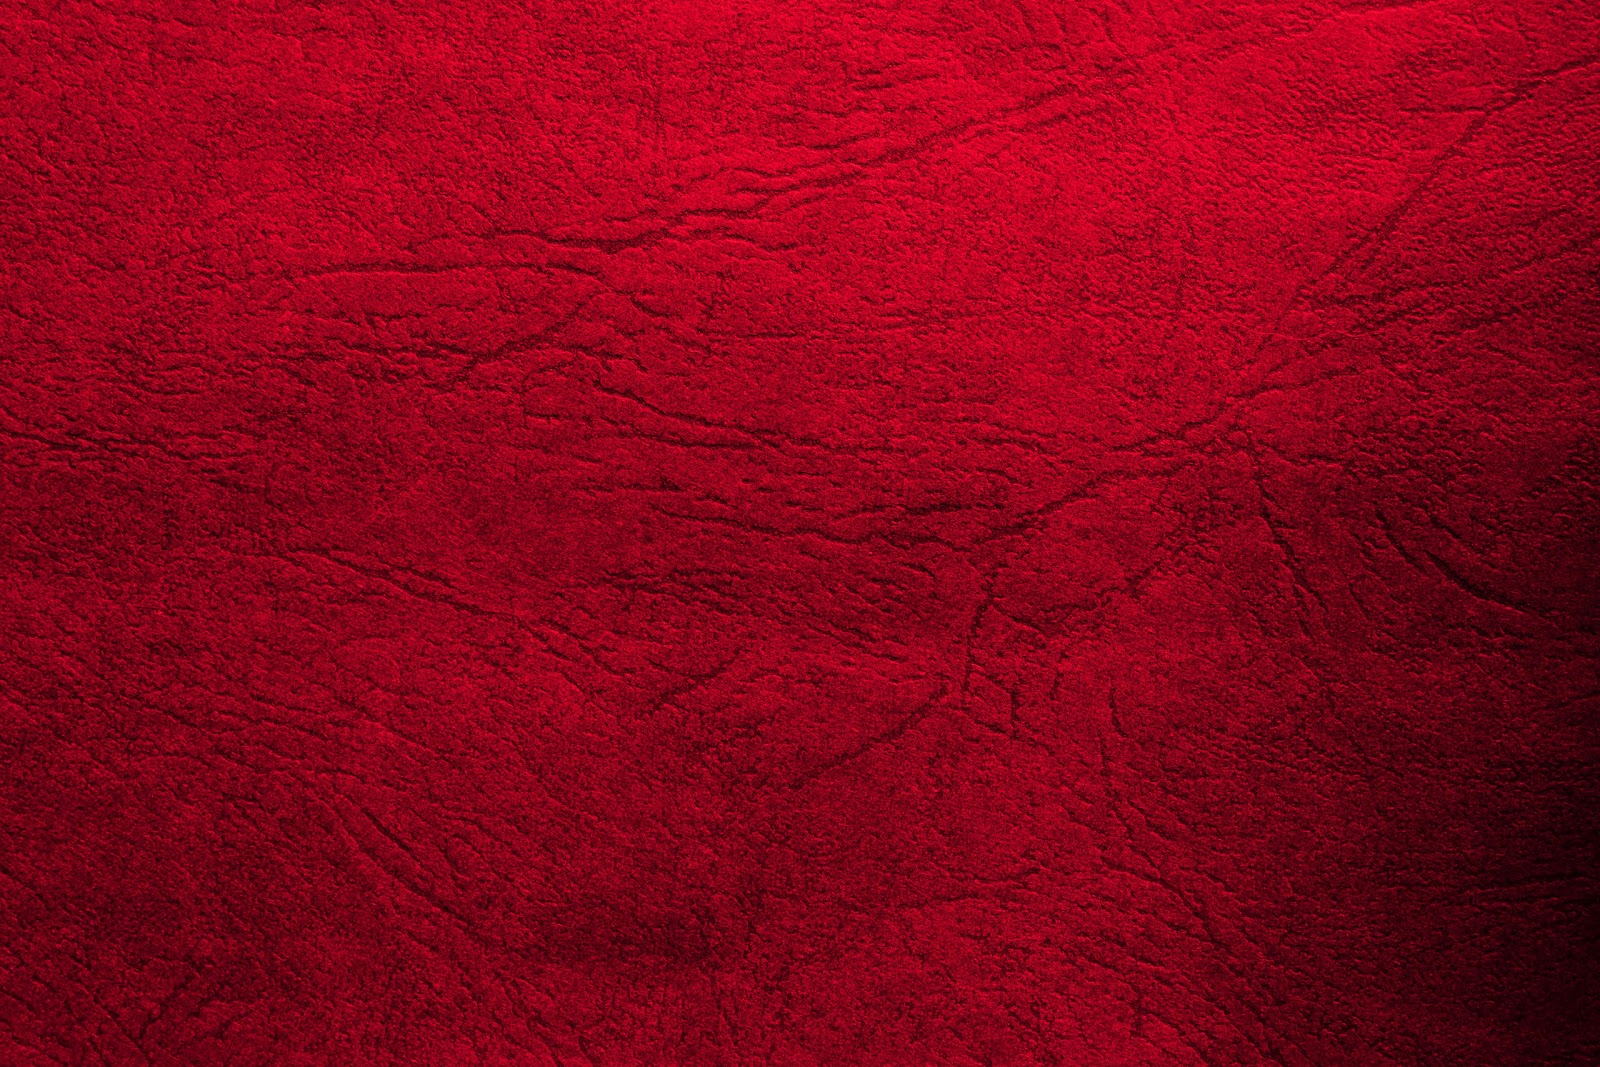 Wallpaper Backgrounds Red Texture Wallpapers 1600x1067